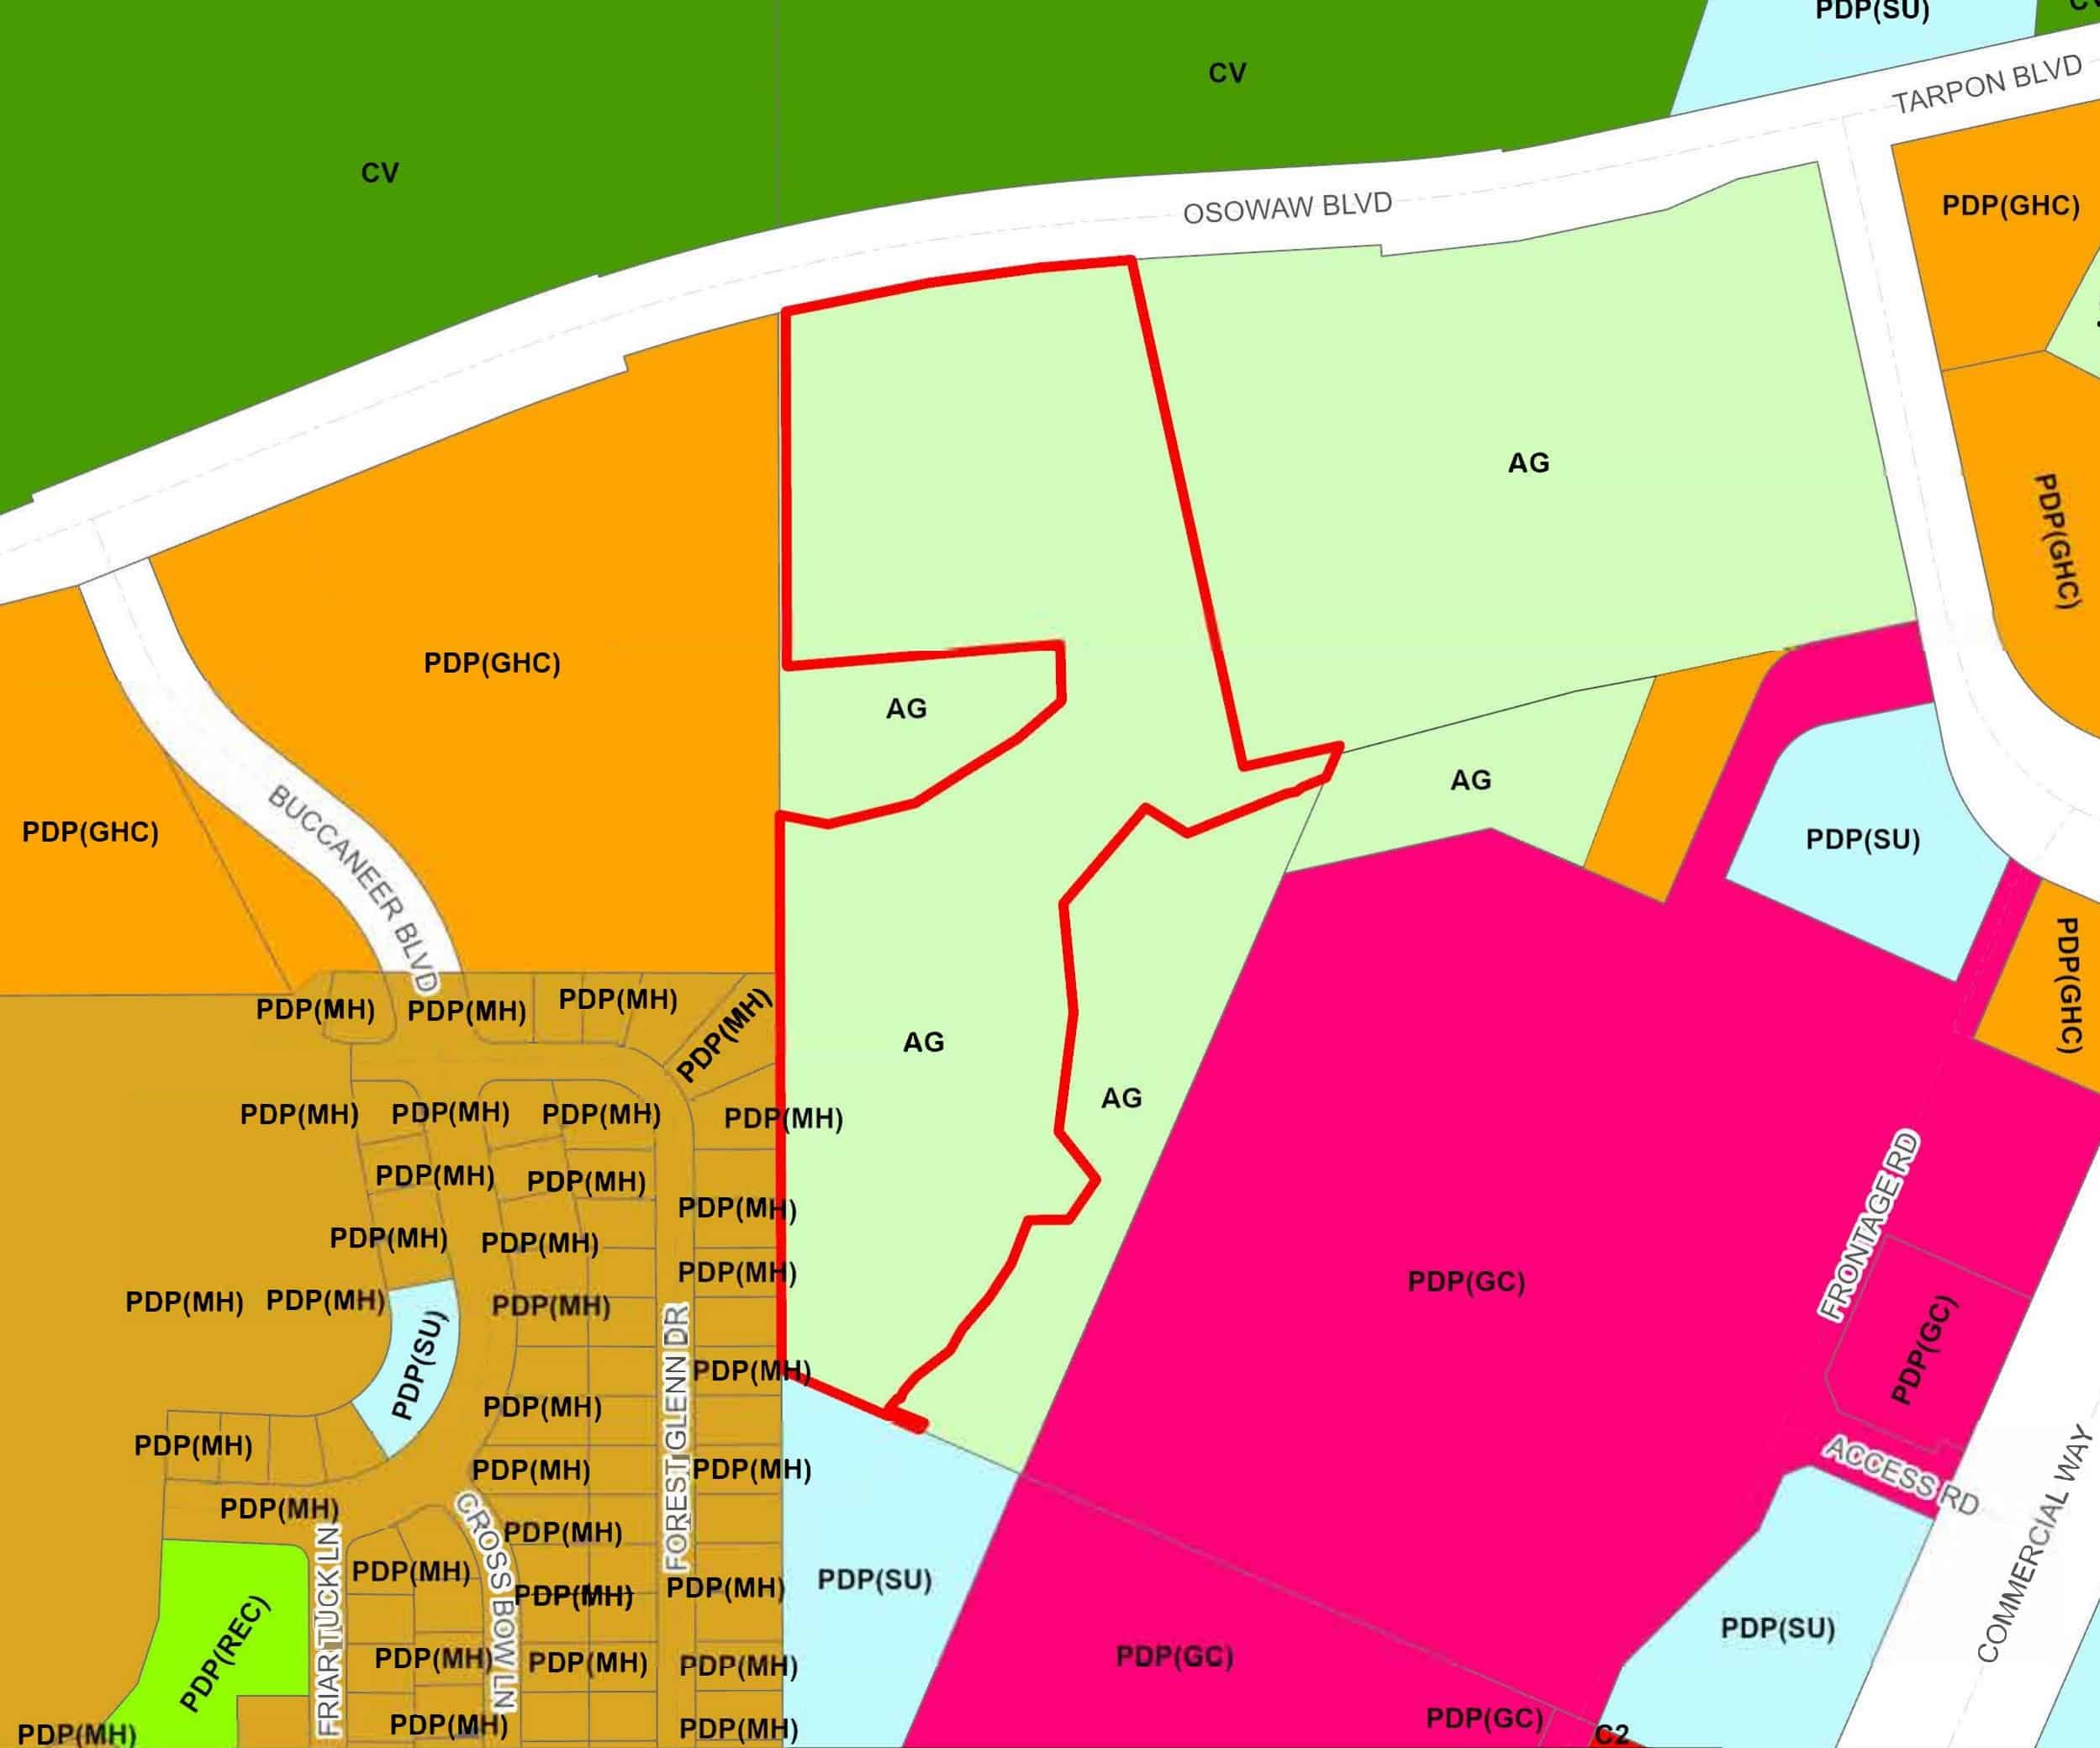 Zoning map of Osowaw property [Credit: Hernando County Central GIS]